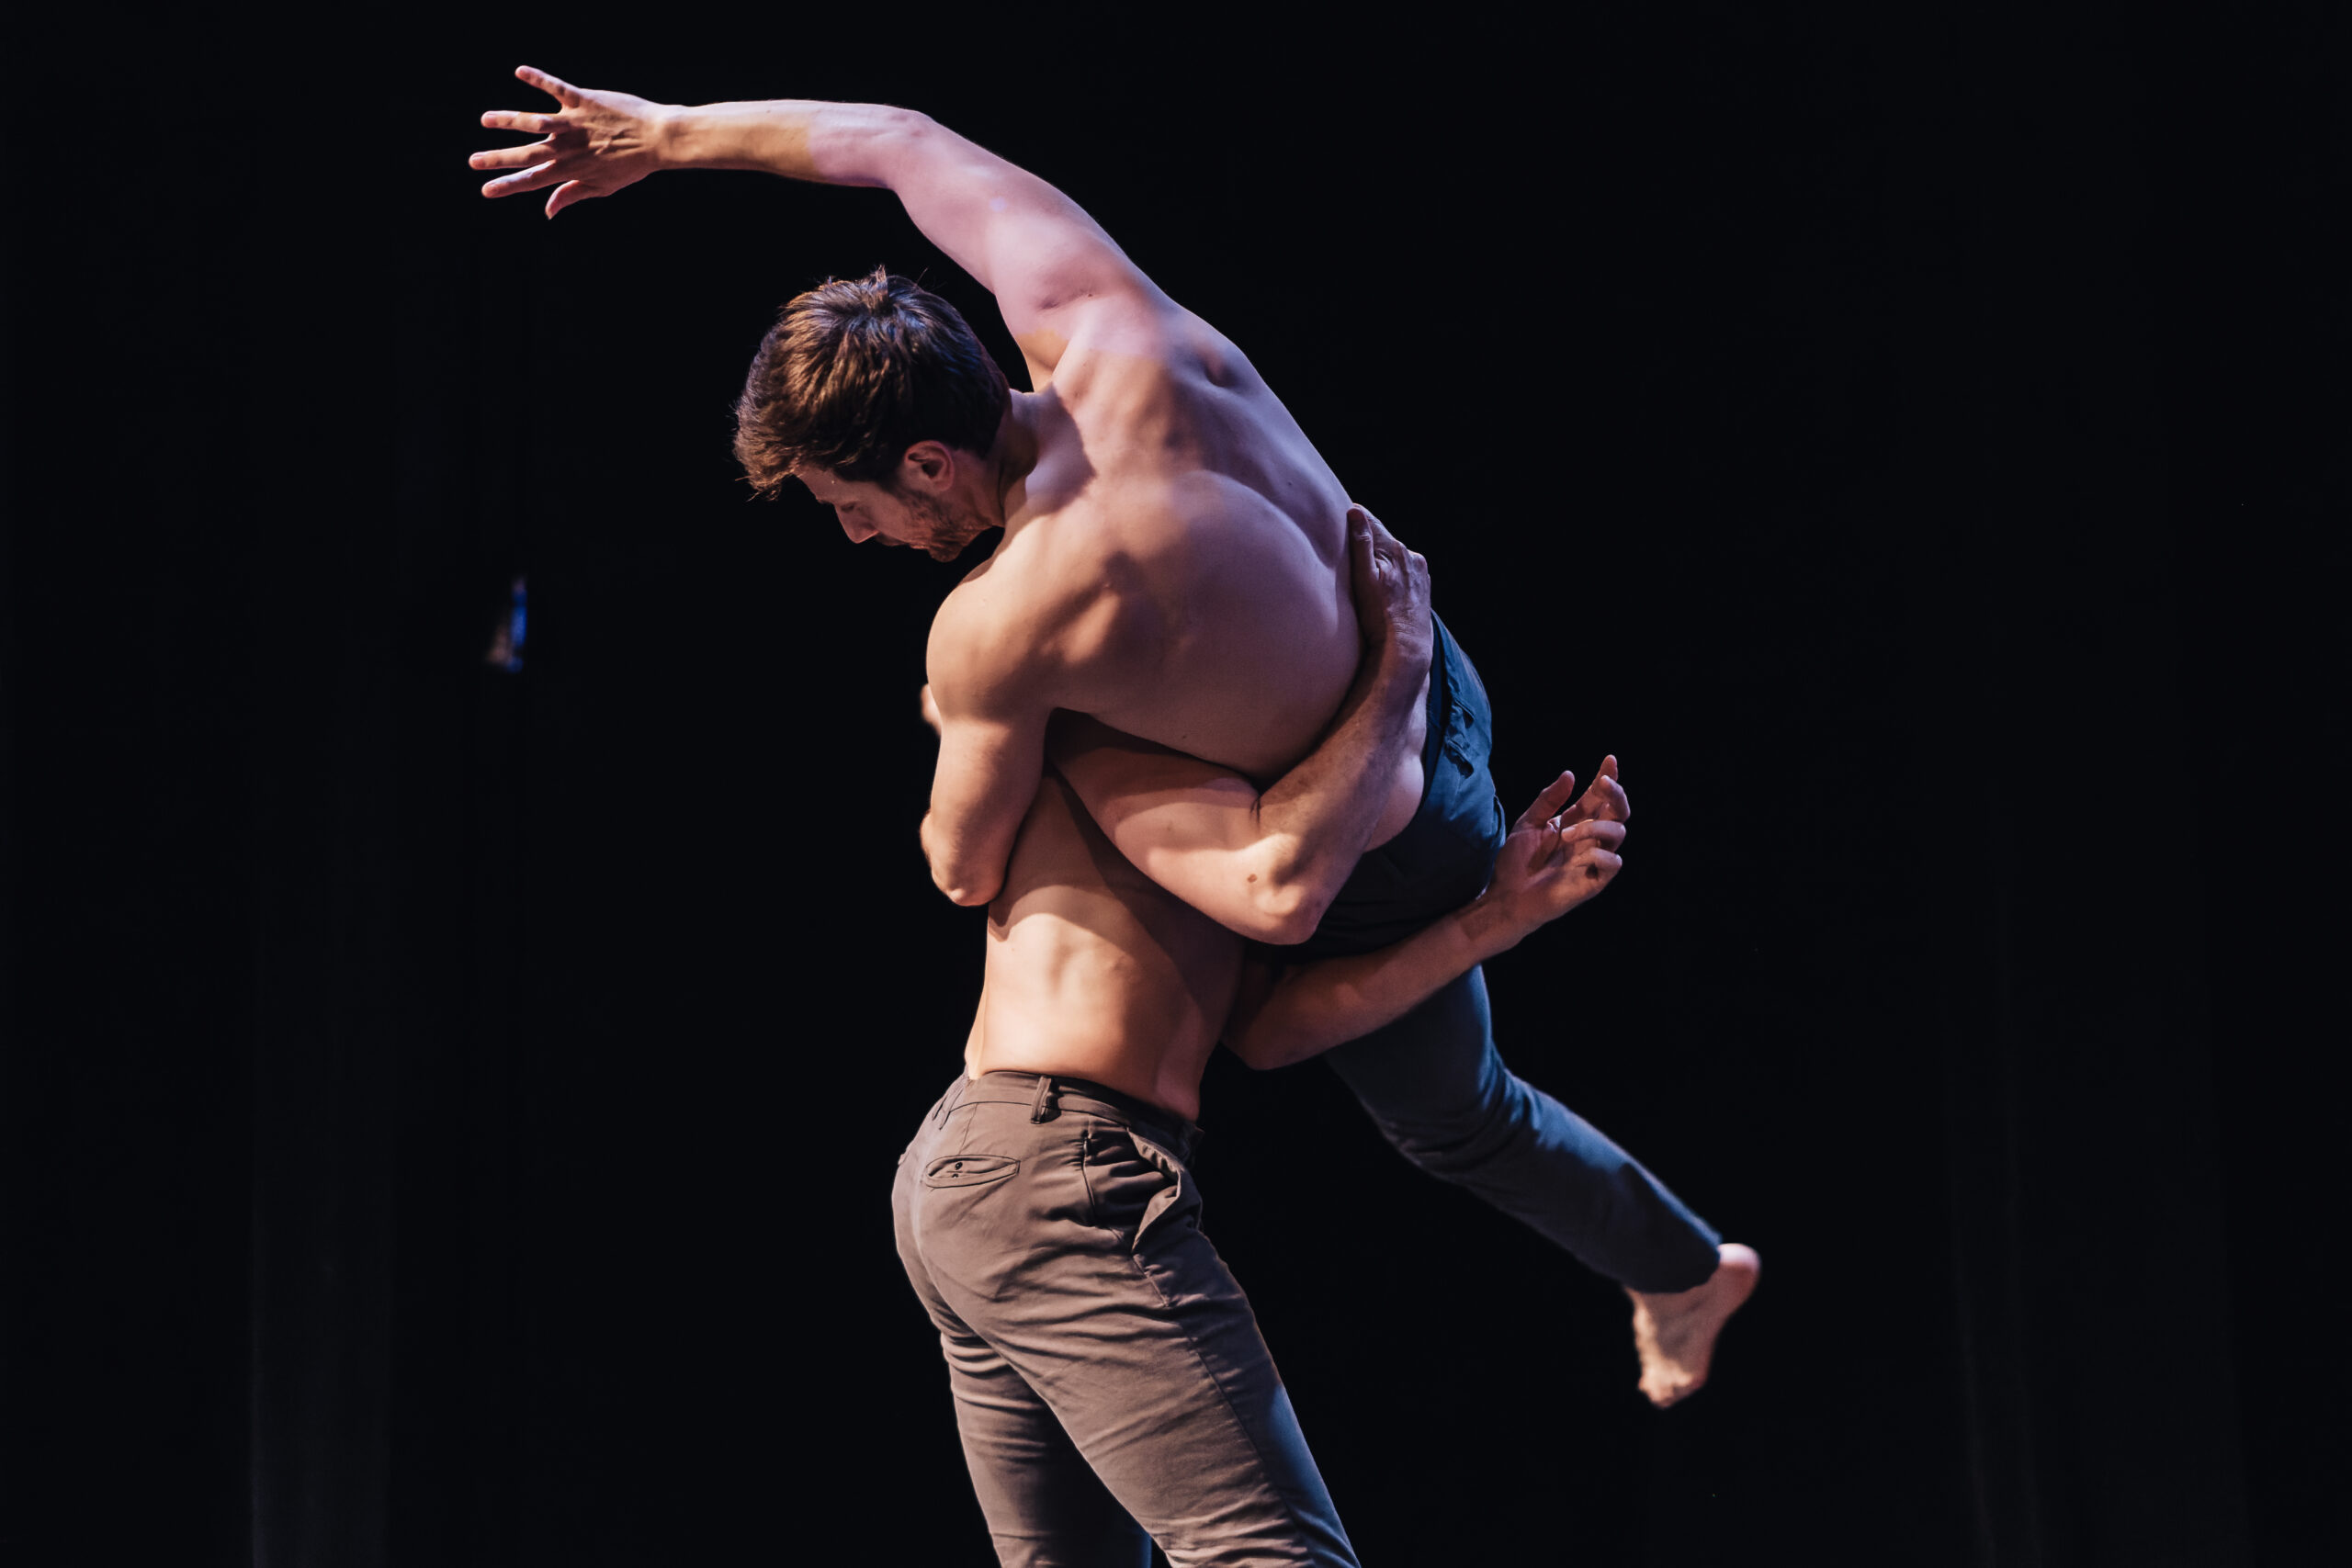 Two men perform on stage, one lifting the other in his arms as he twists in an acrobatic position. Both men are shirtless and wear neutral-coloured trousers. Original image by Curtis Perry.